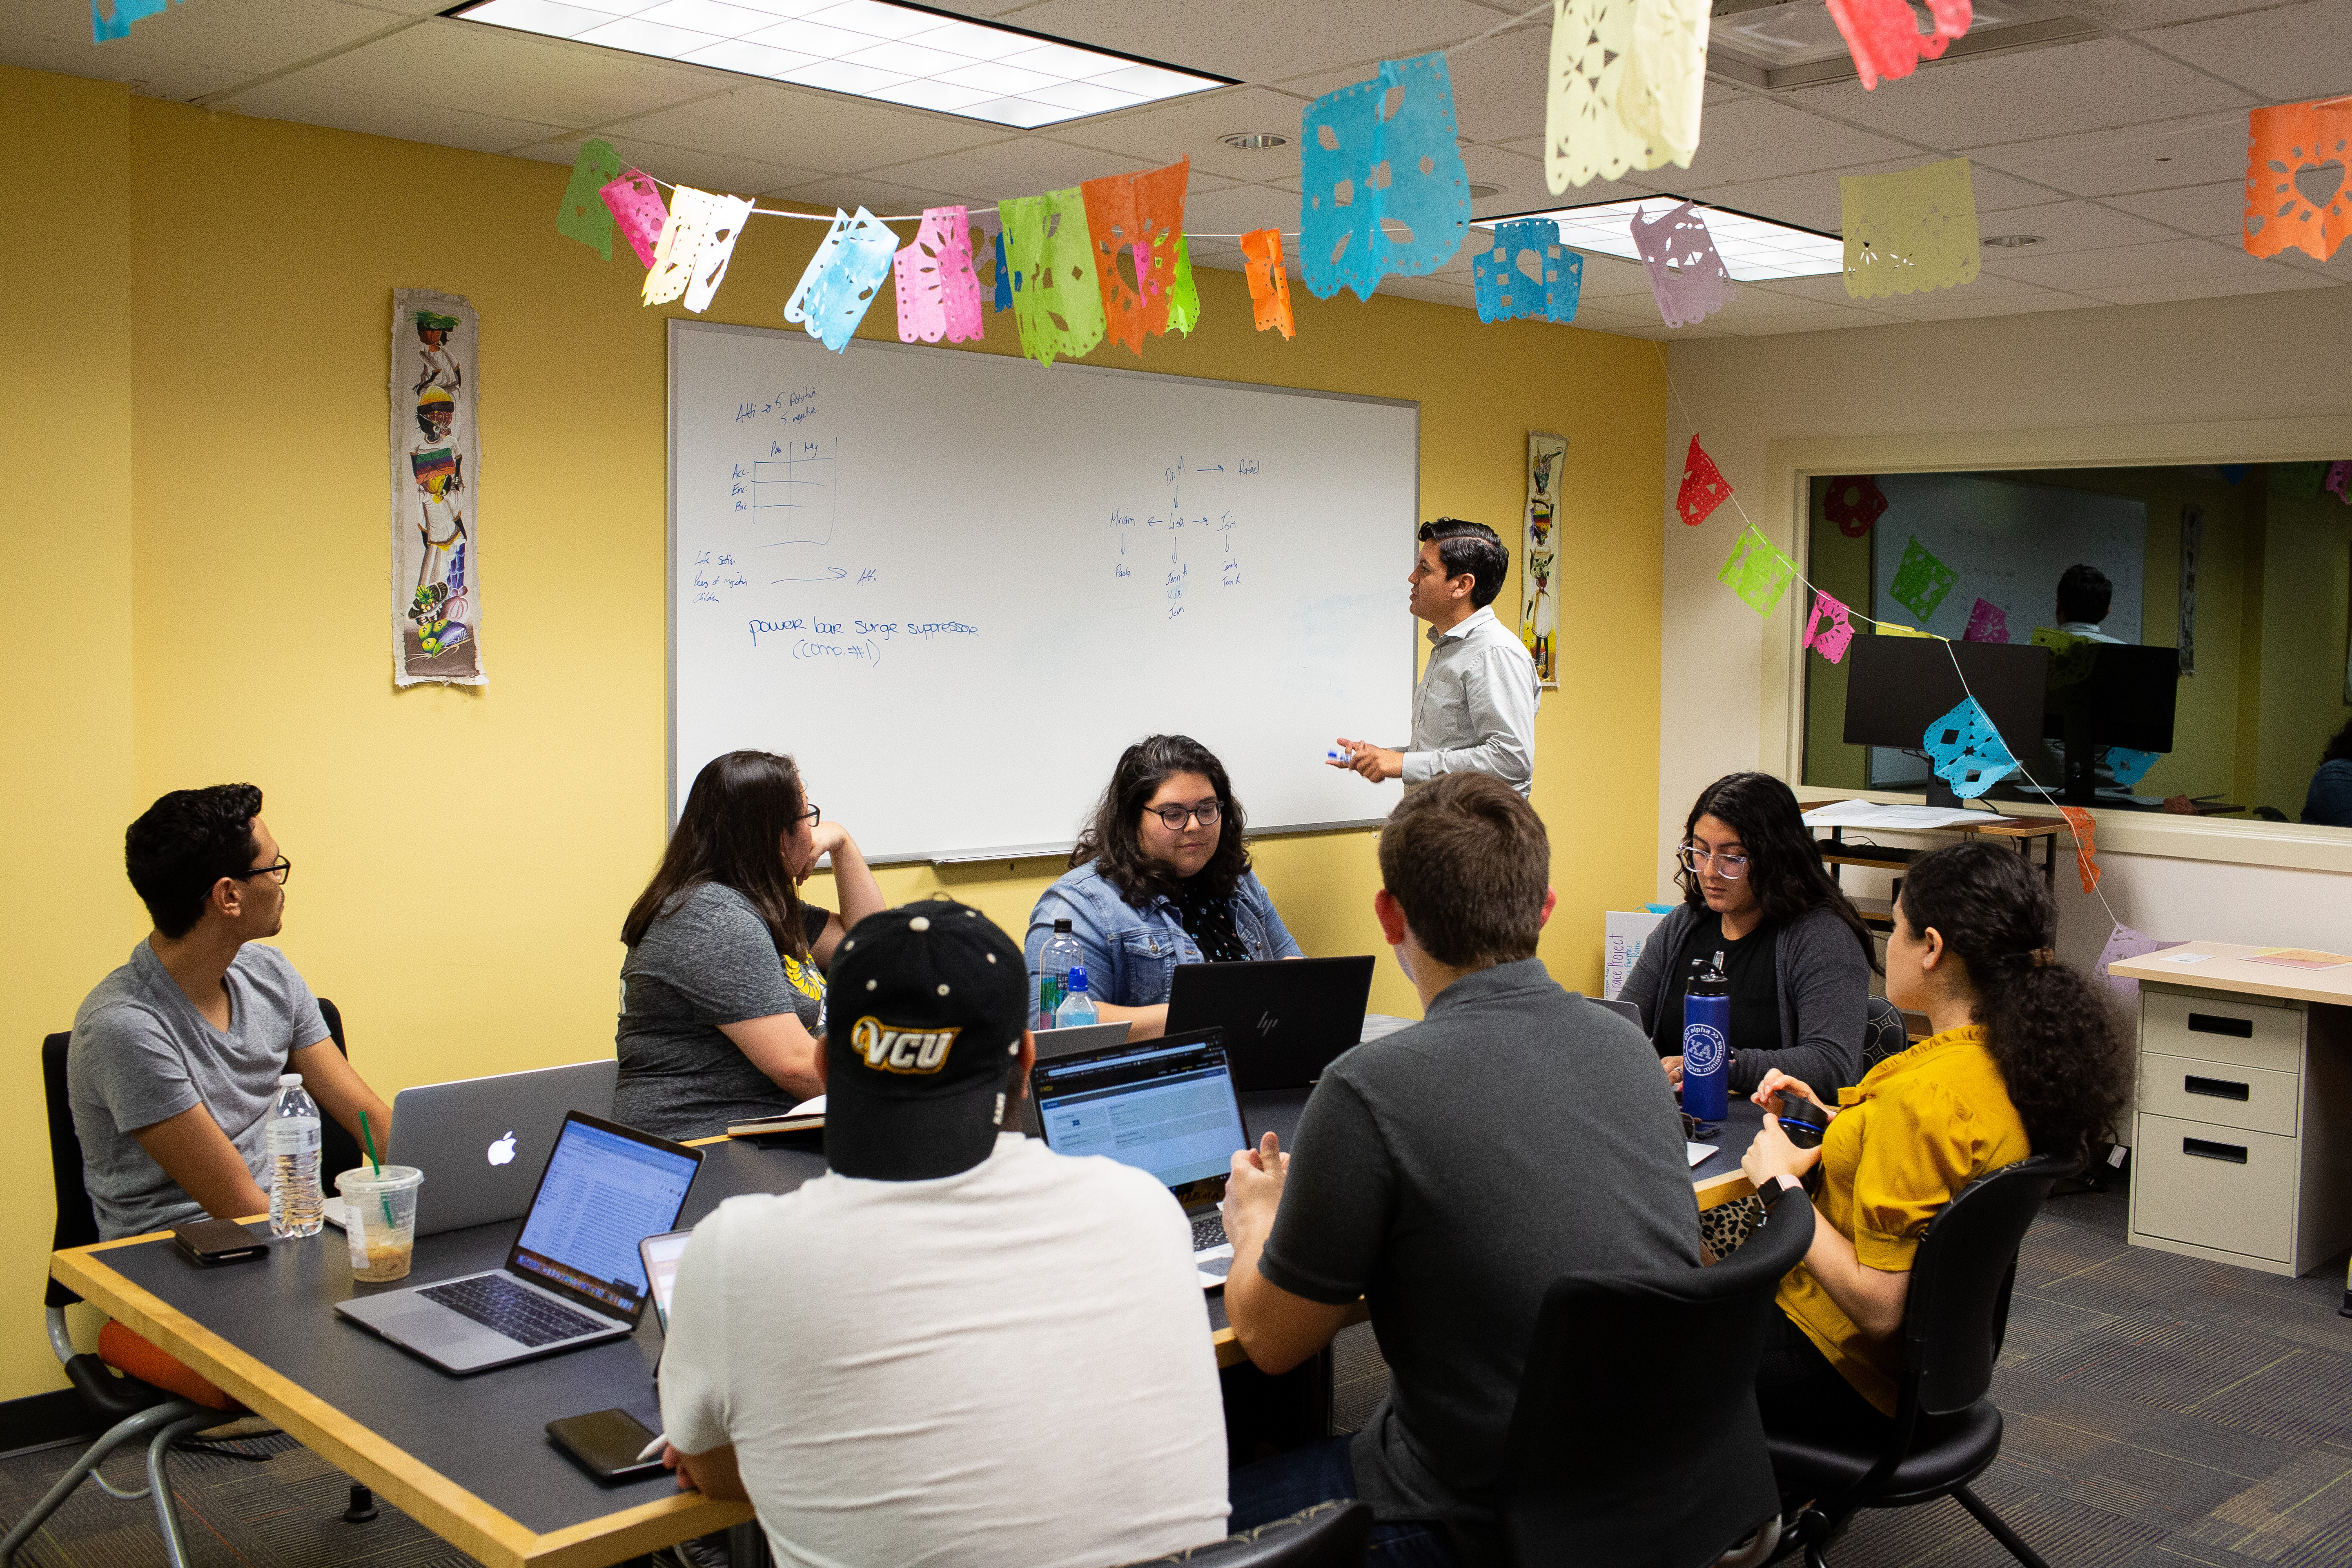 Students sitting together at a table taking notes while Oswaldo Moreno stands at a white-board